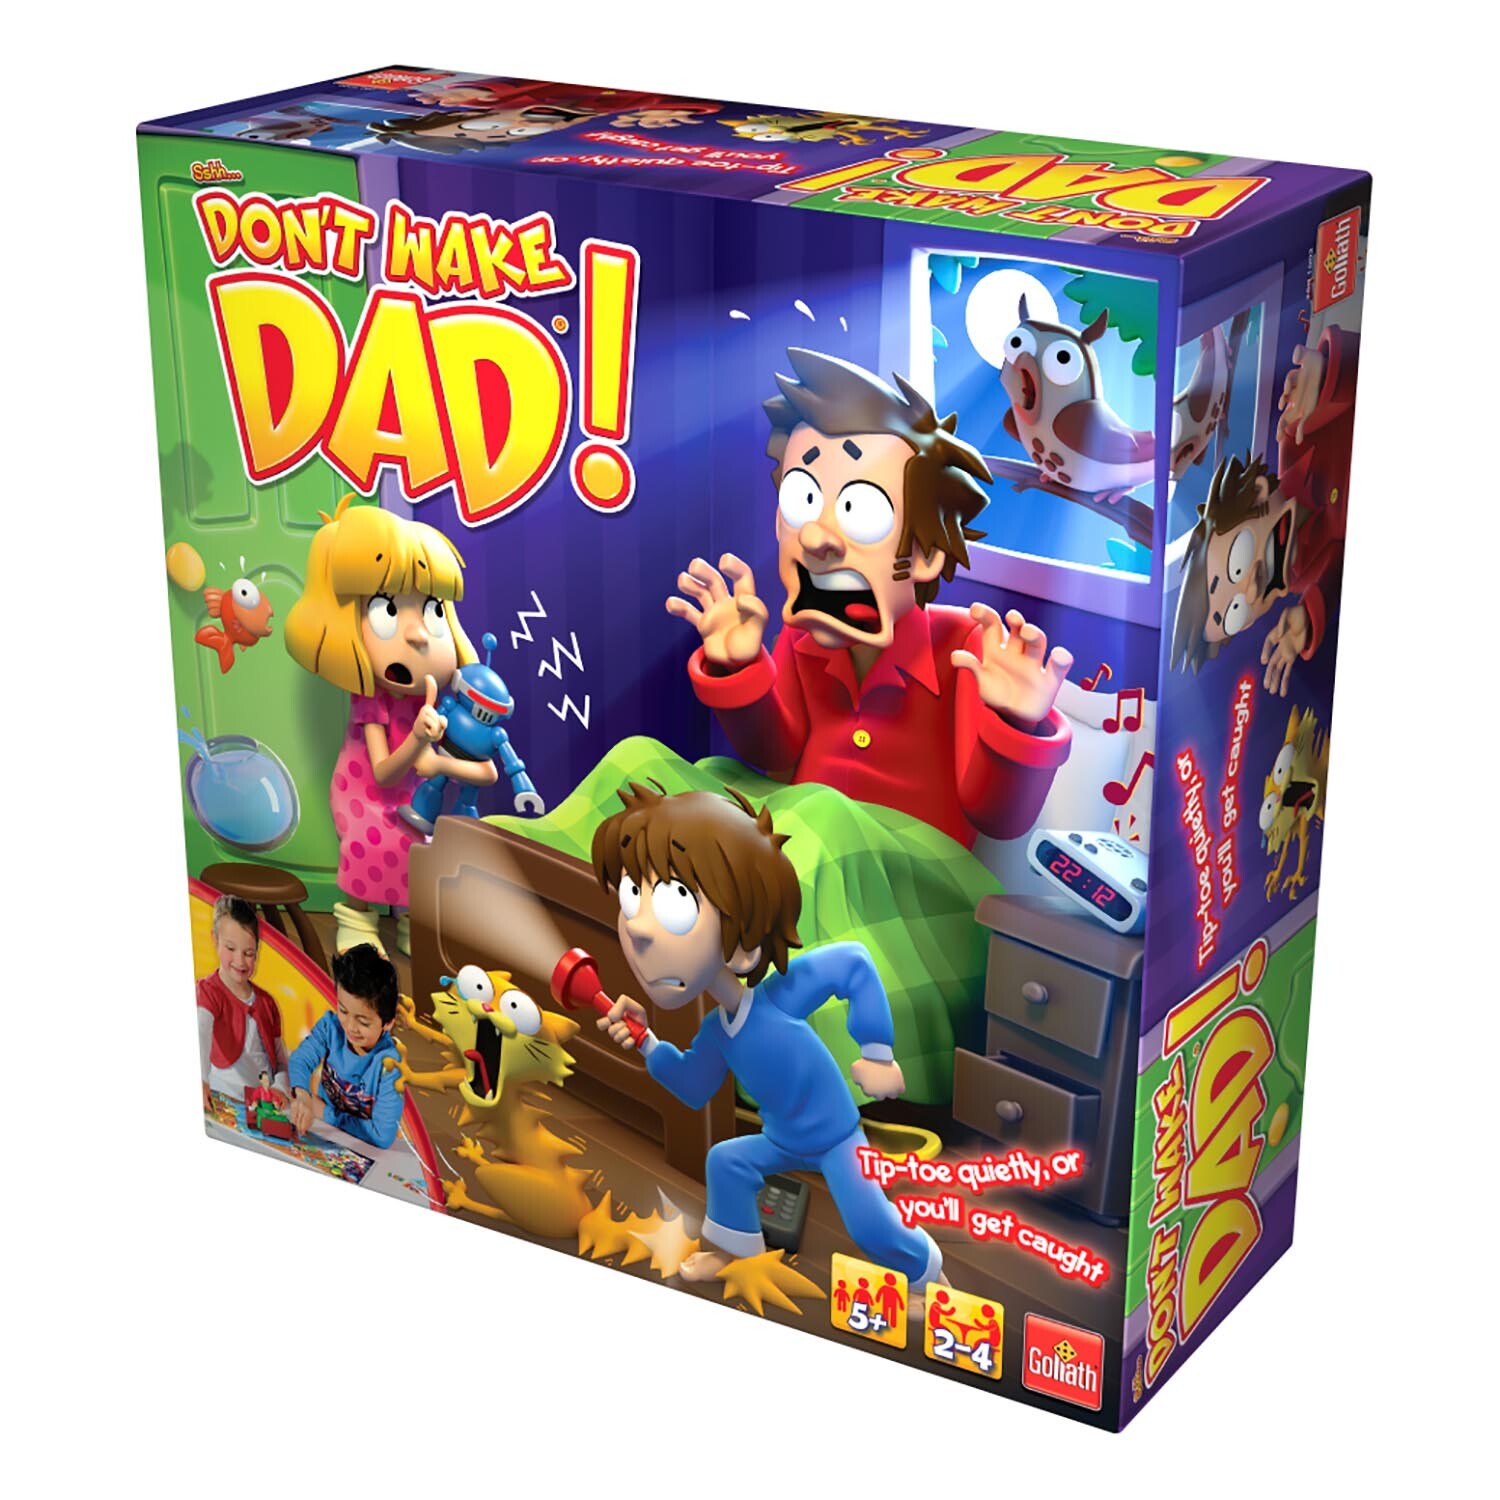 Goliath Games Sshh Don't Wake Dad Family Game Image 3